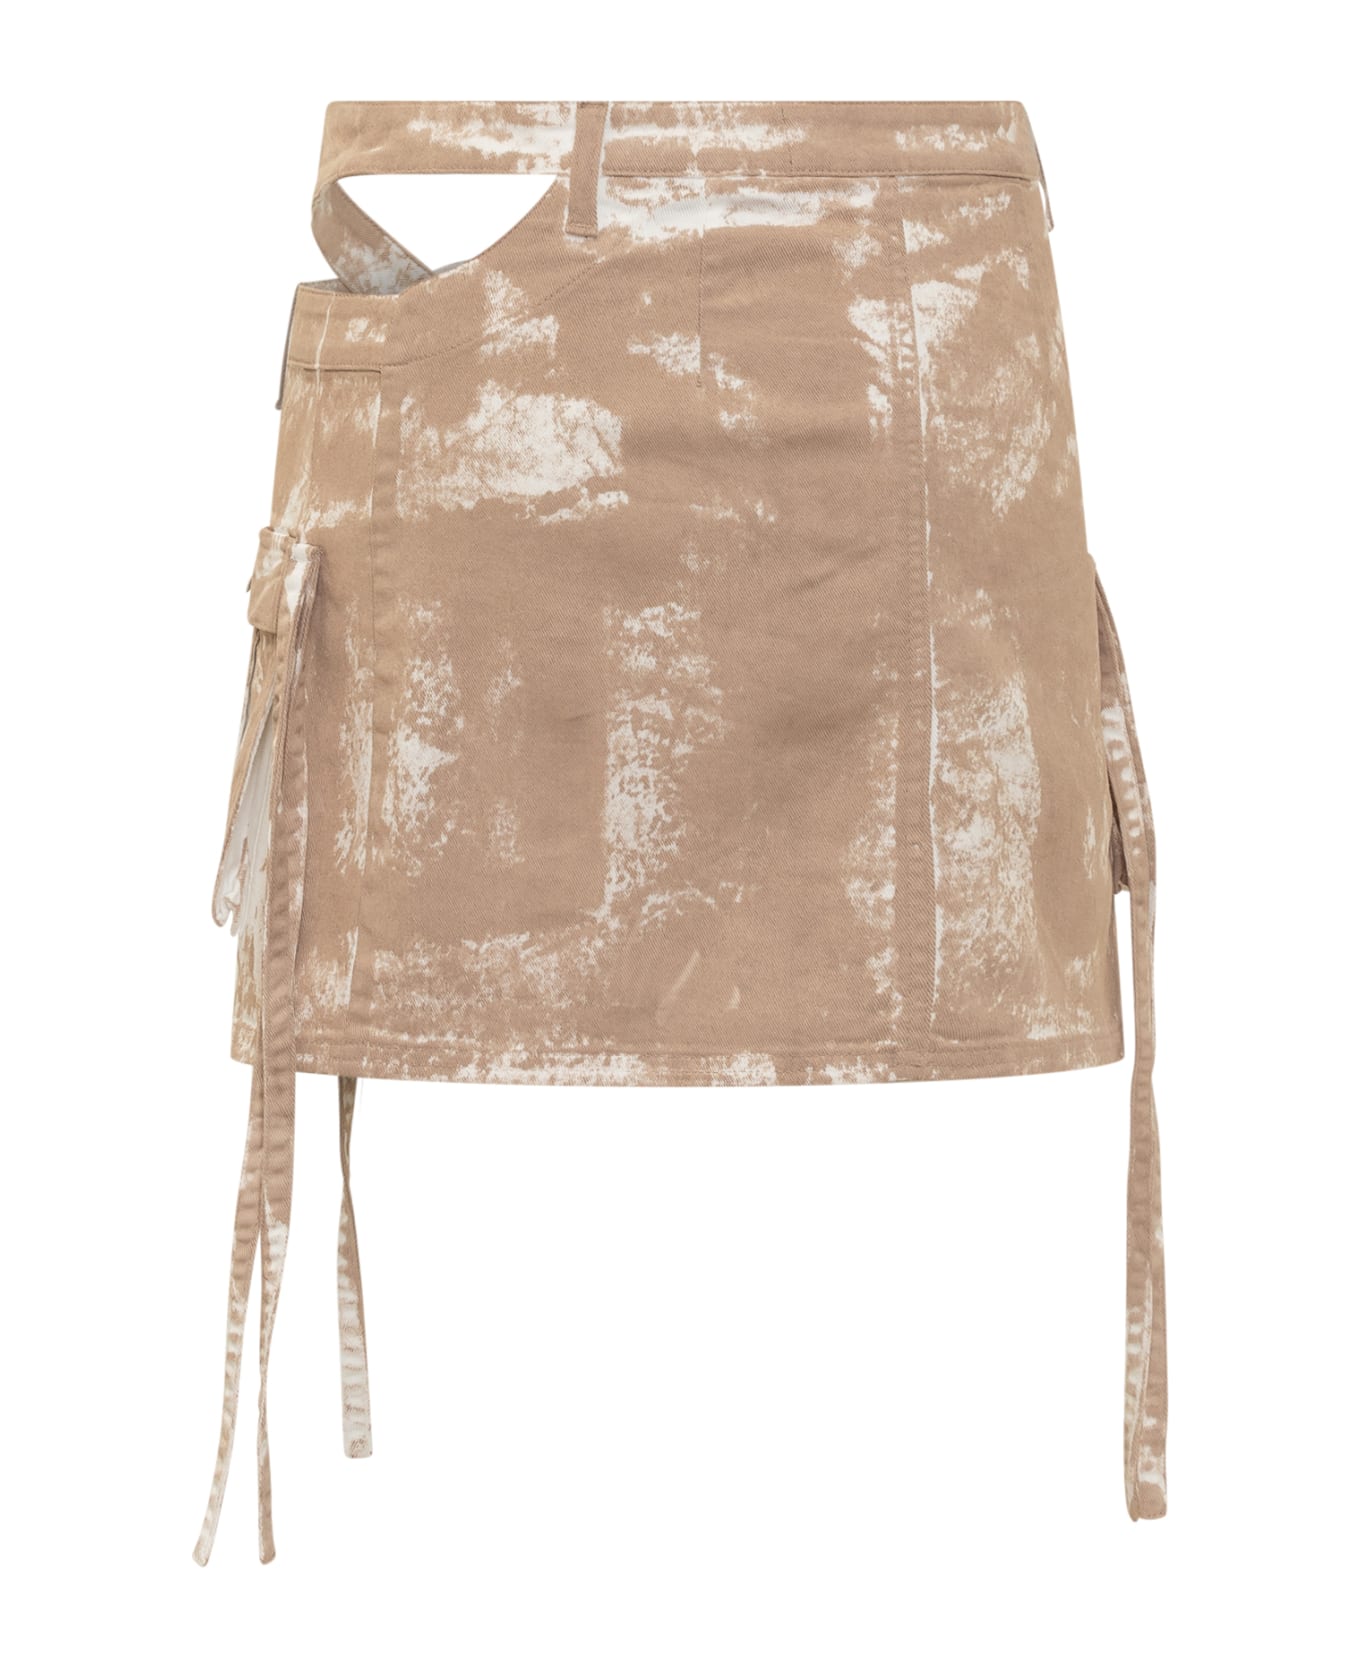 ANDREĀDAMO Cut Out Mini Skirt - WASHED NUDE